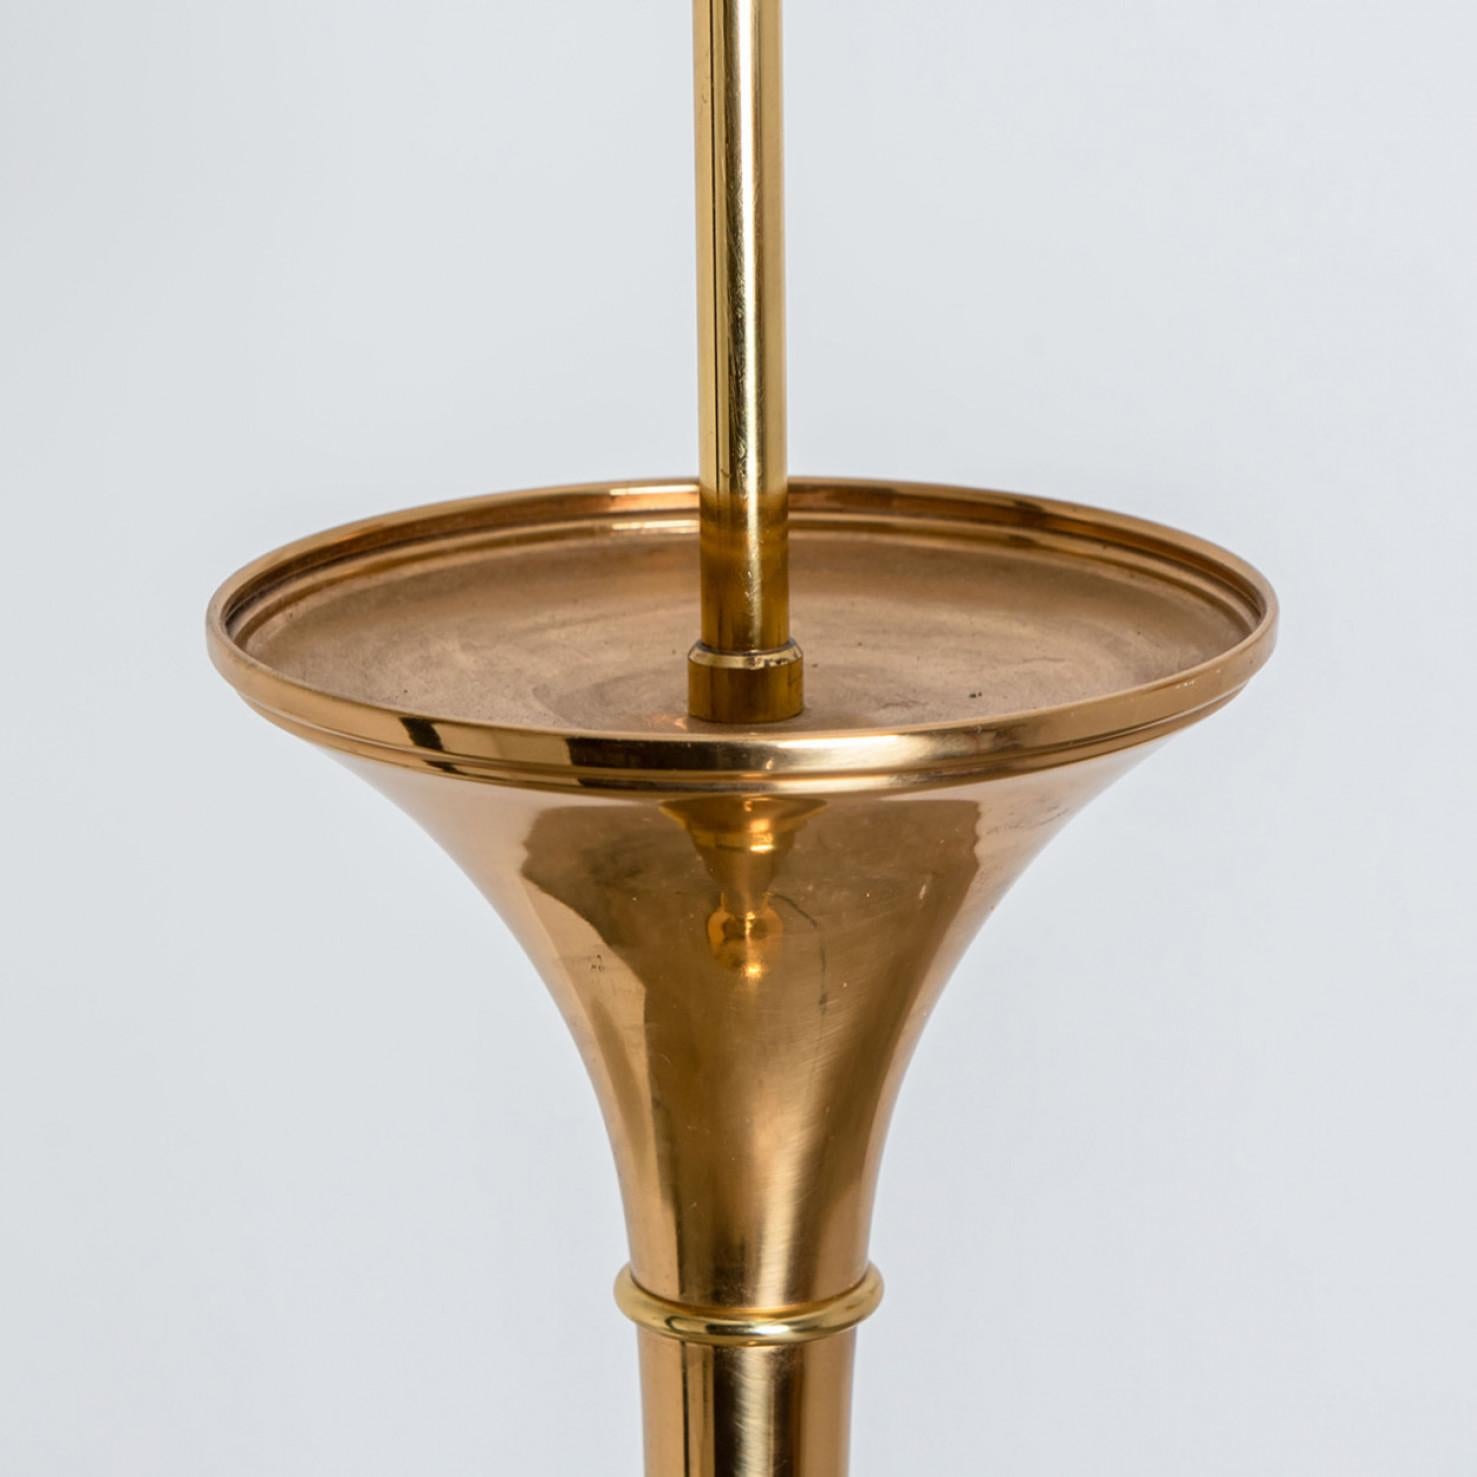 Pair of floor Lamps Gold Brass and Wood by Ingo Maurer, Europe, Germany, 1968 In Good Condition For Sale In Rijssen, NL